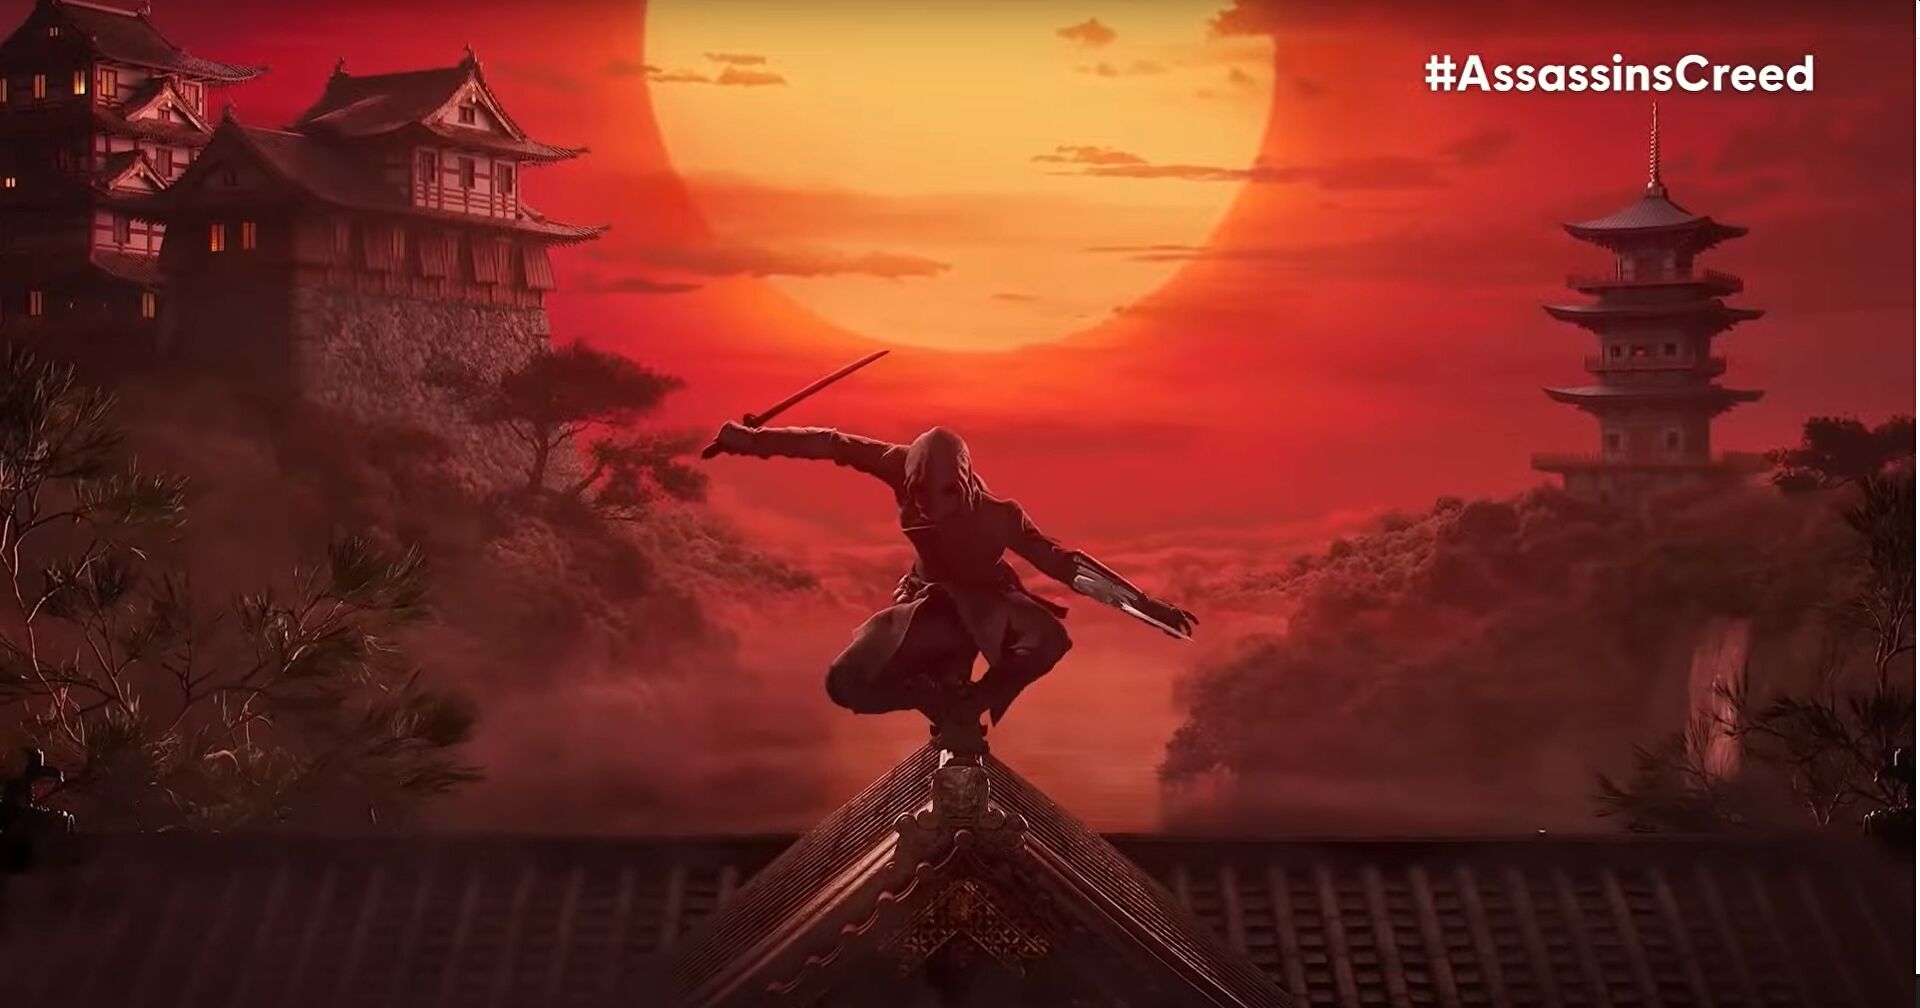 Assassin’s Creed is finally heading to feudal Japan, plus one with Blair Witch vibes